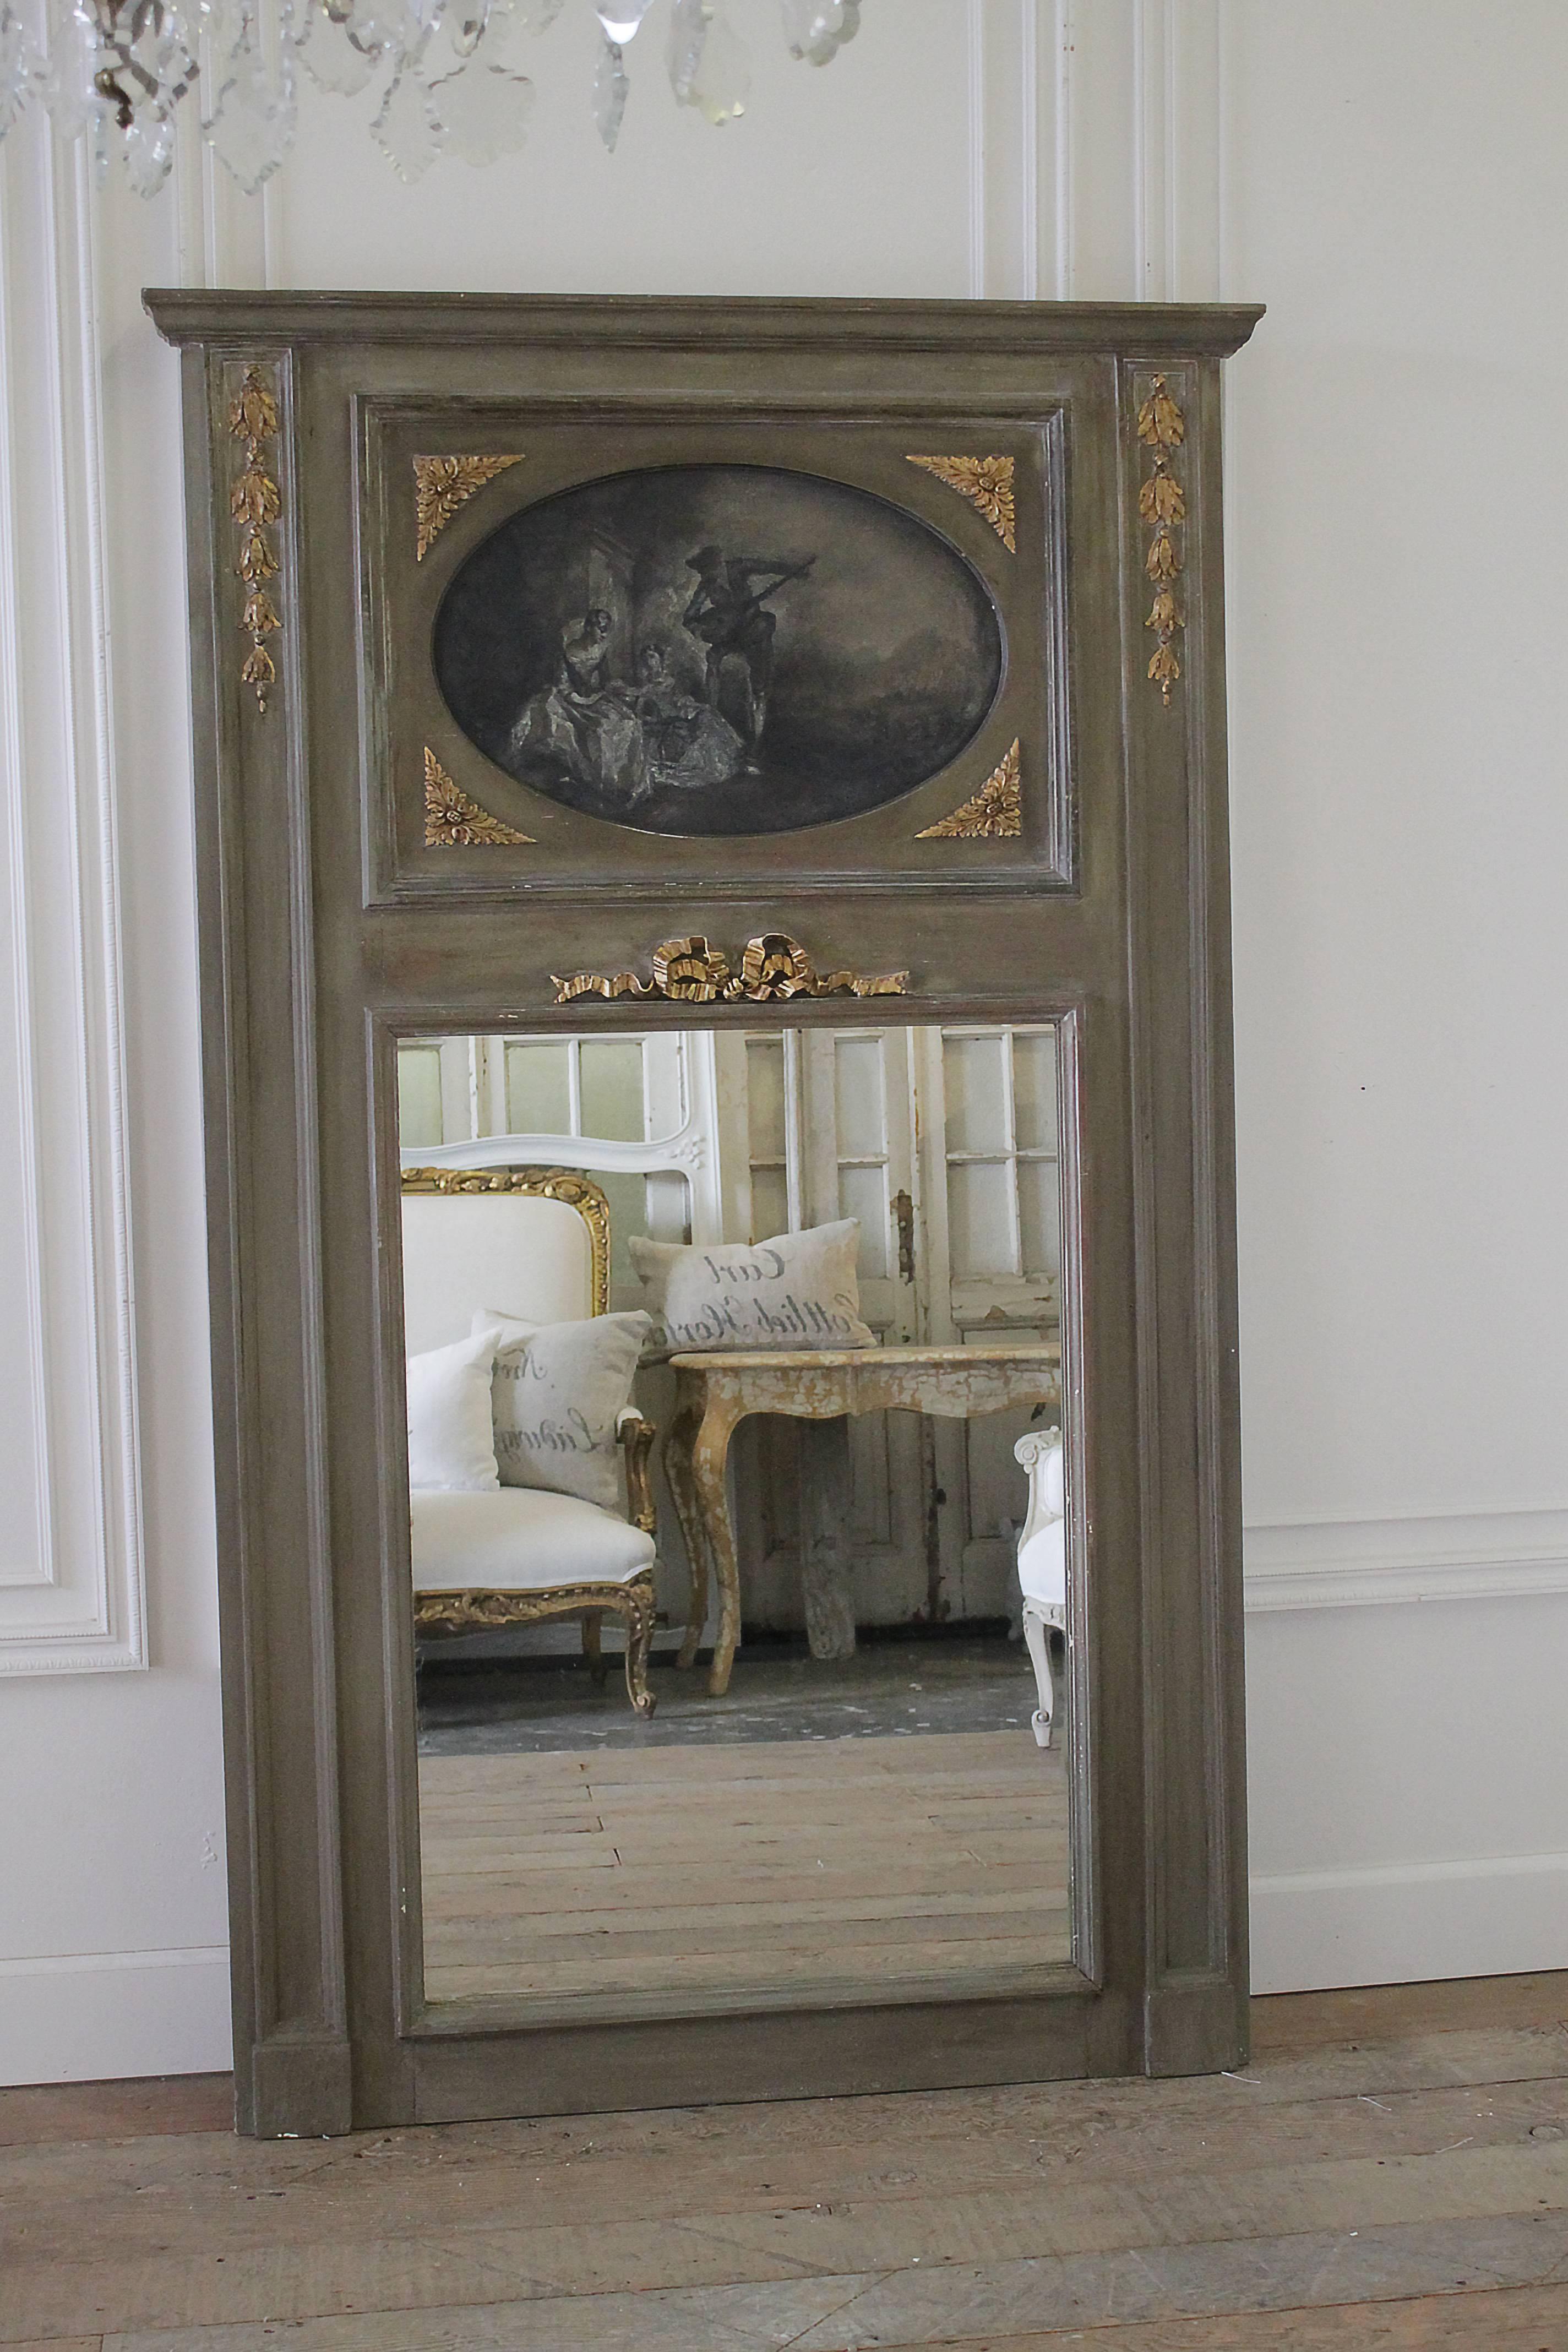 An early 20th century French pier mirror or trumeau, painted in a weathered grey tone and gilded, with oil on canvas picture inset at top in oval gilded frame with bow.
Measures: 44.5